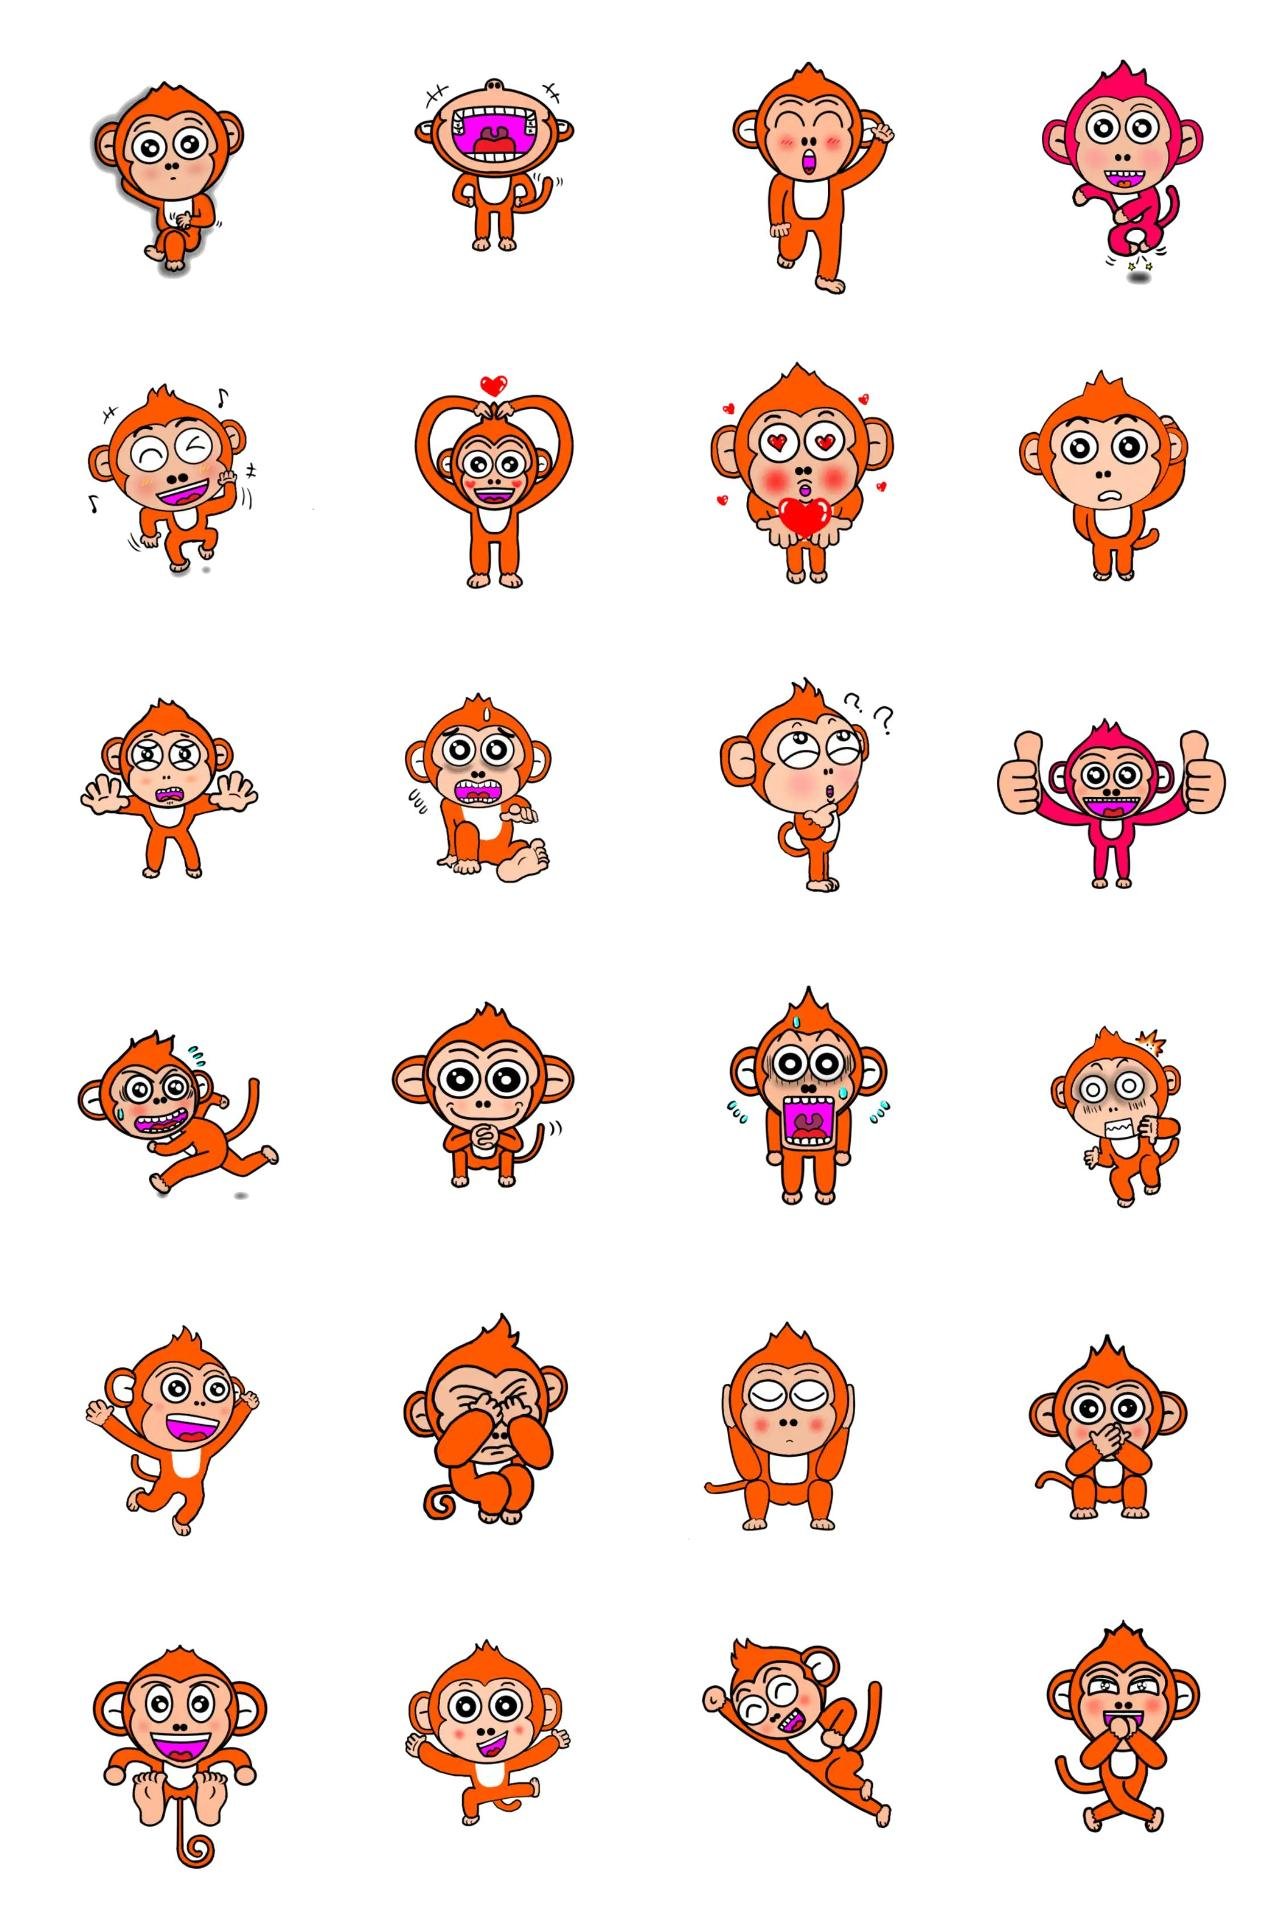 HappyMong Animals sticker pack for Whatsapp, Telegram, Signal, and others chatting and message apps